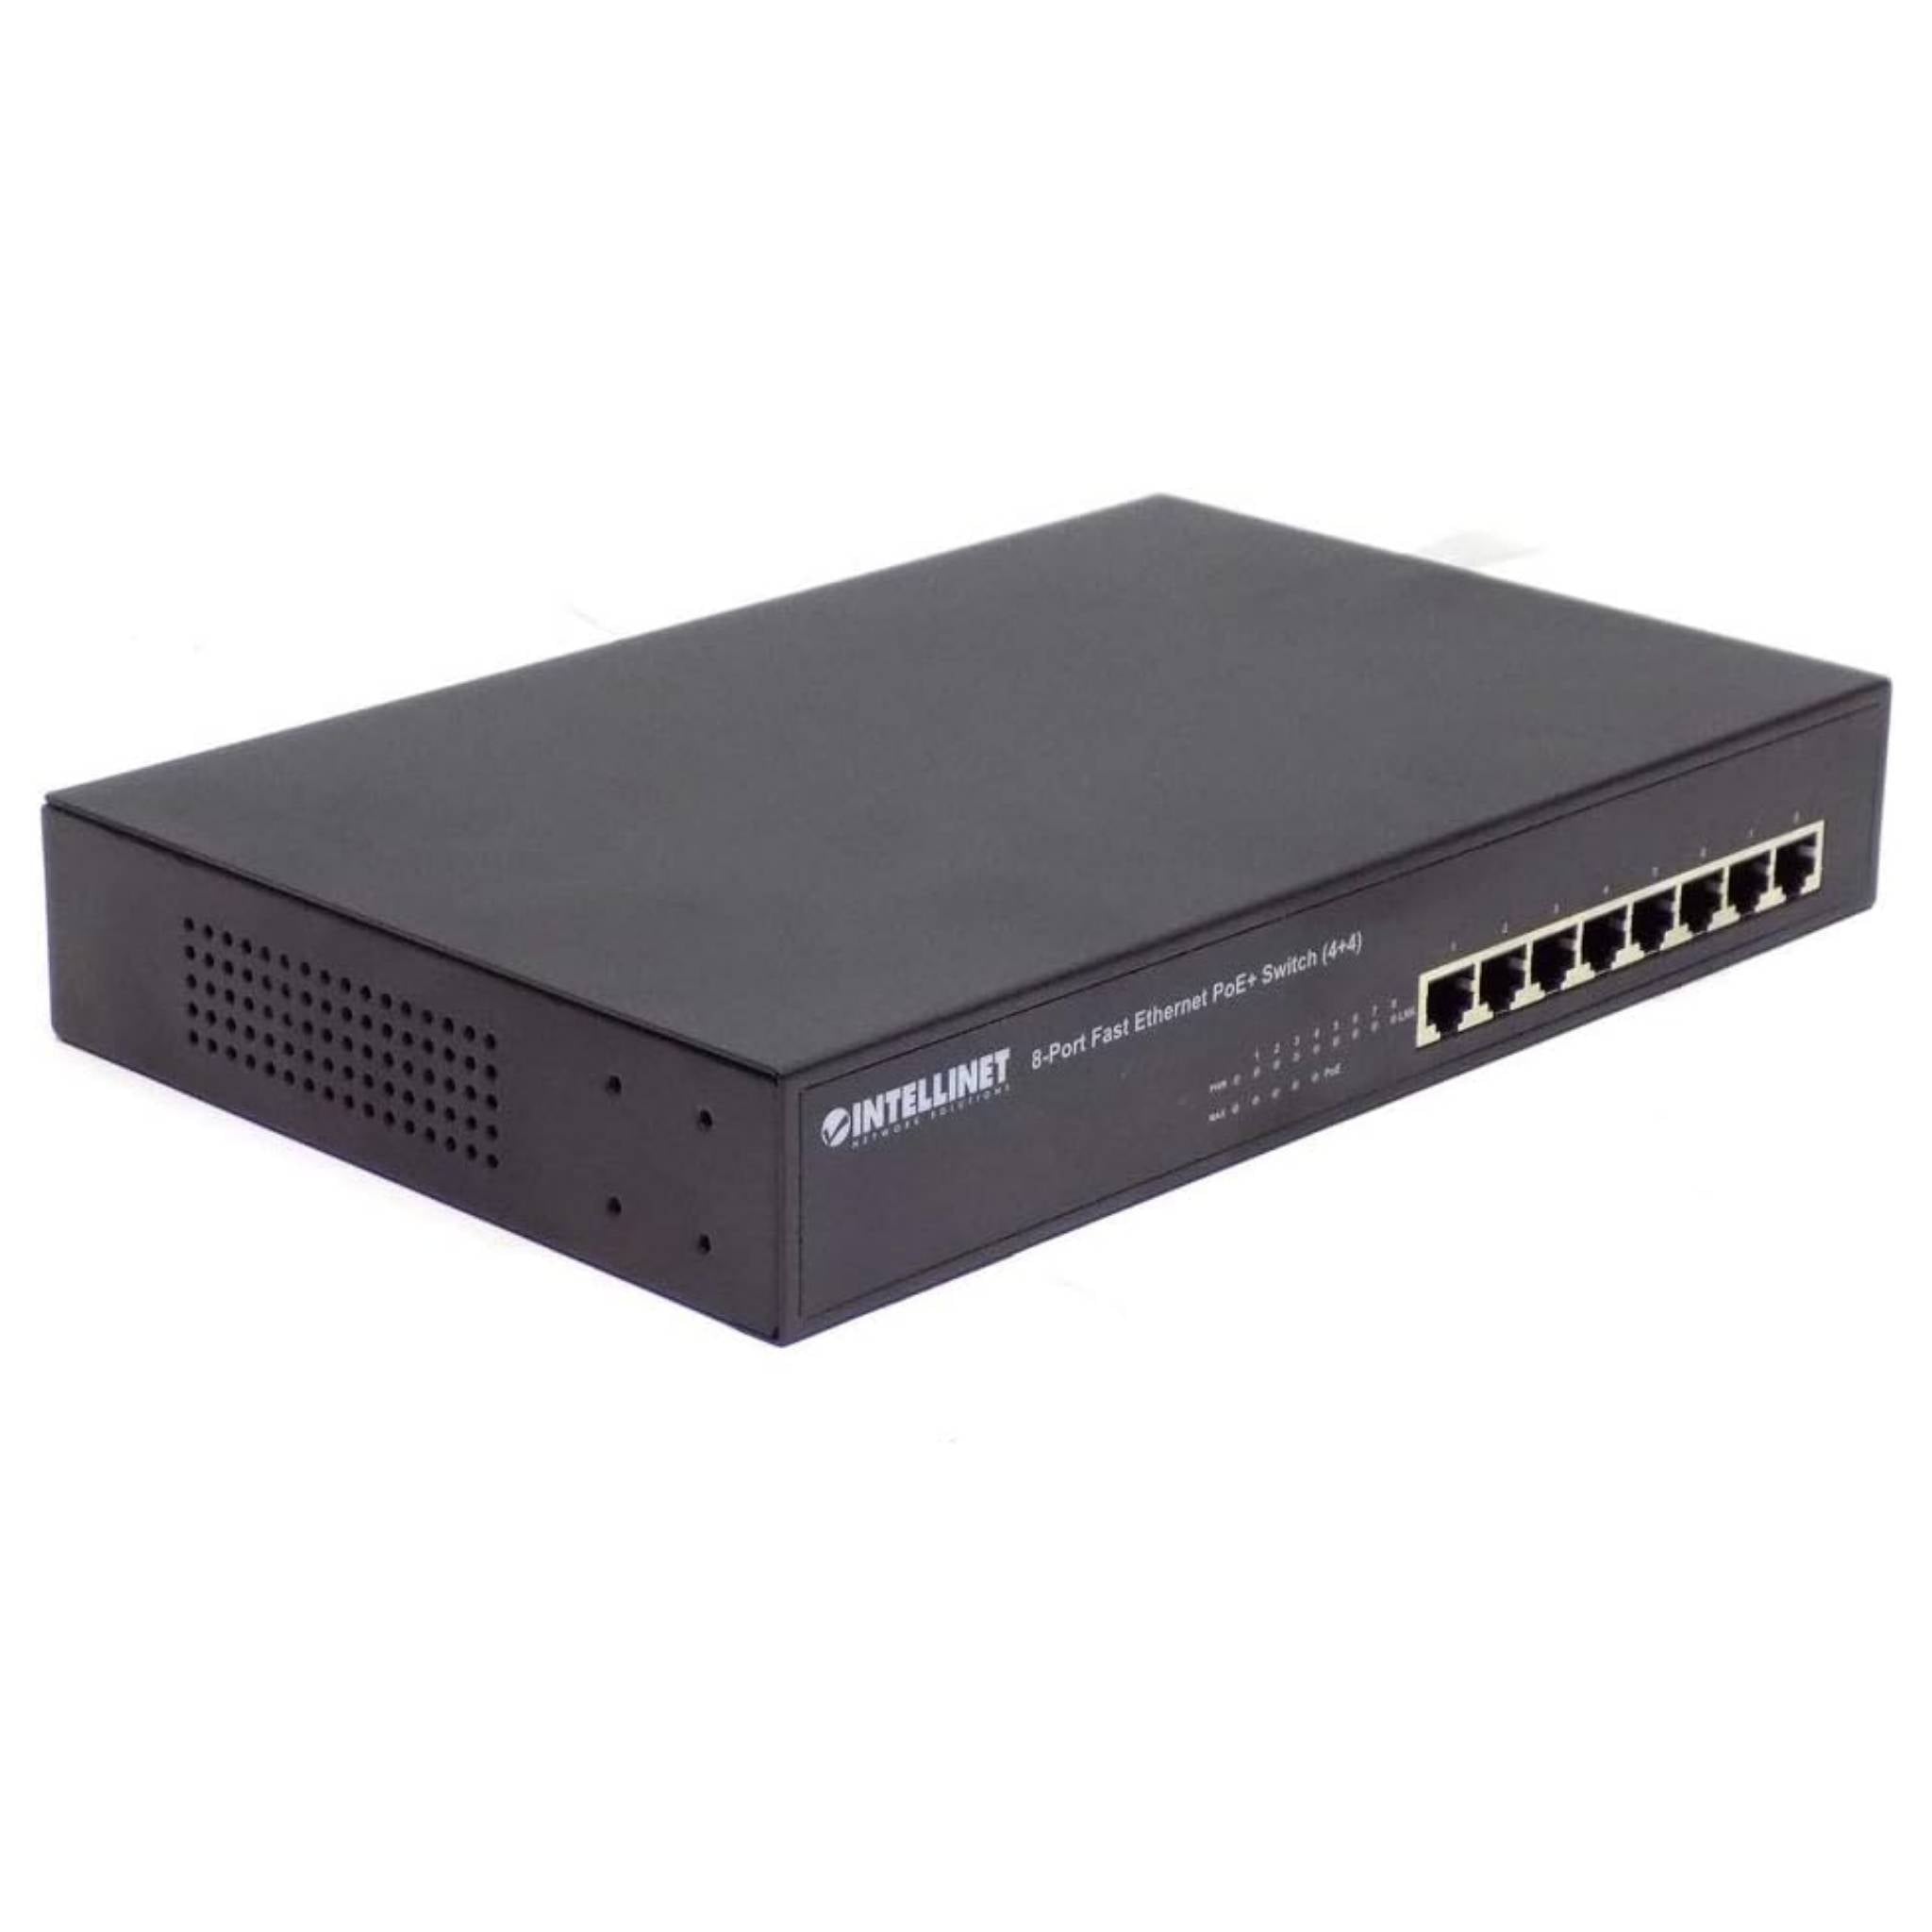 8-Port Fast Ethernet POE+ Switch with 4 POE Ports and 4 Standard Ports in Rack-Mount Design